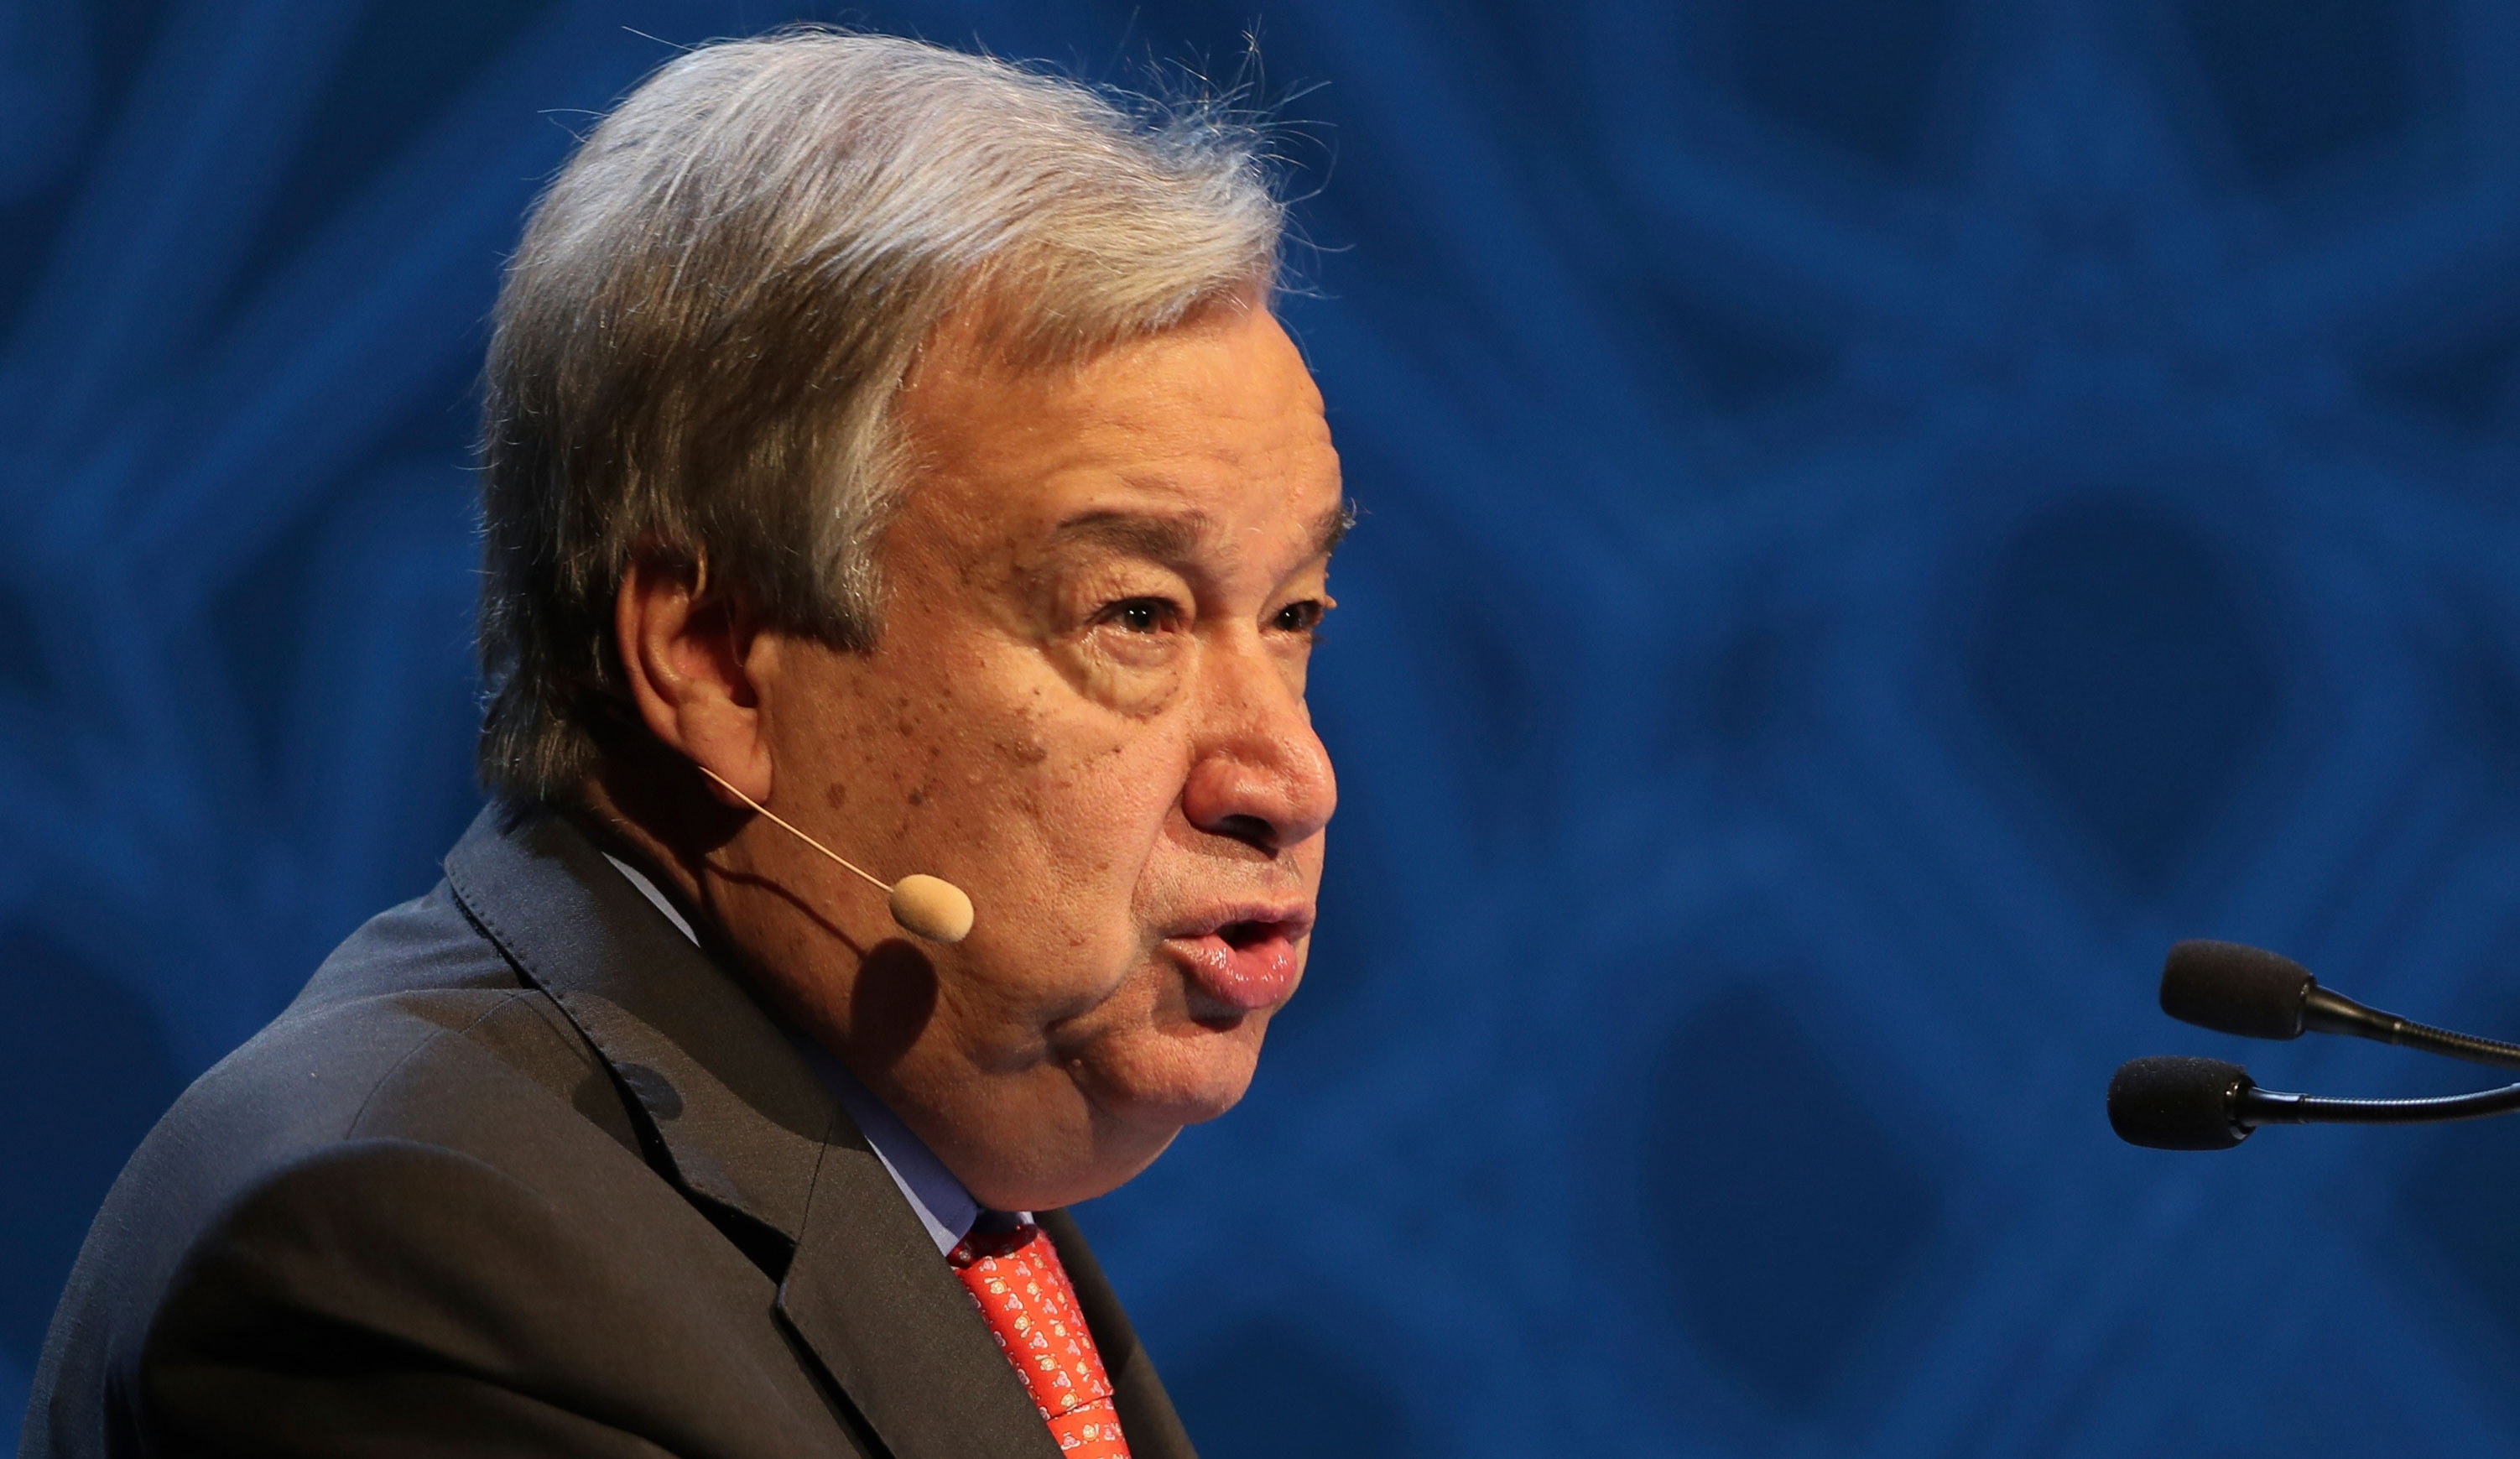 UN secretary-general Antonio Guterres talks to the audience at the opening ceremony of the United Nations climate change summit in Abu Dhabi, on June 30, 2019. 